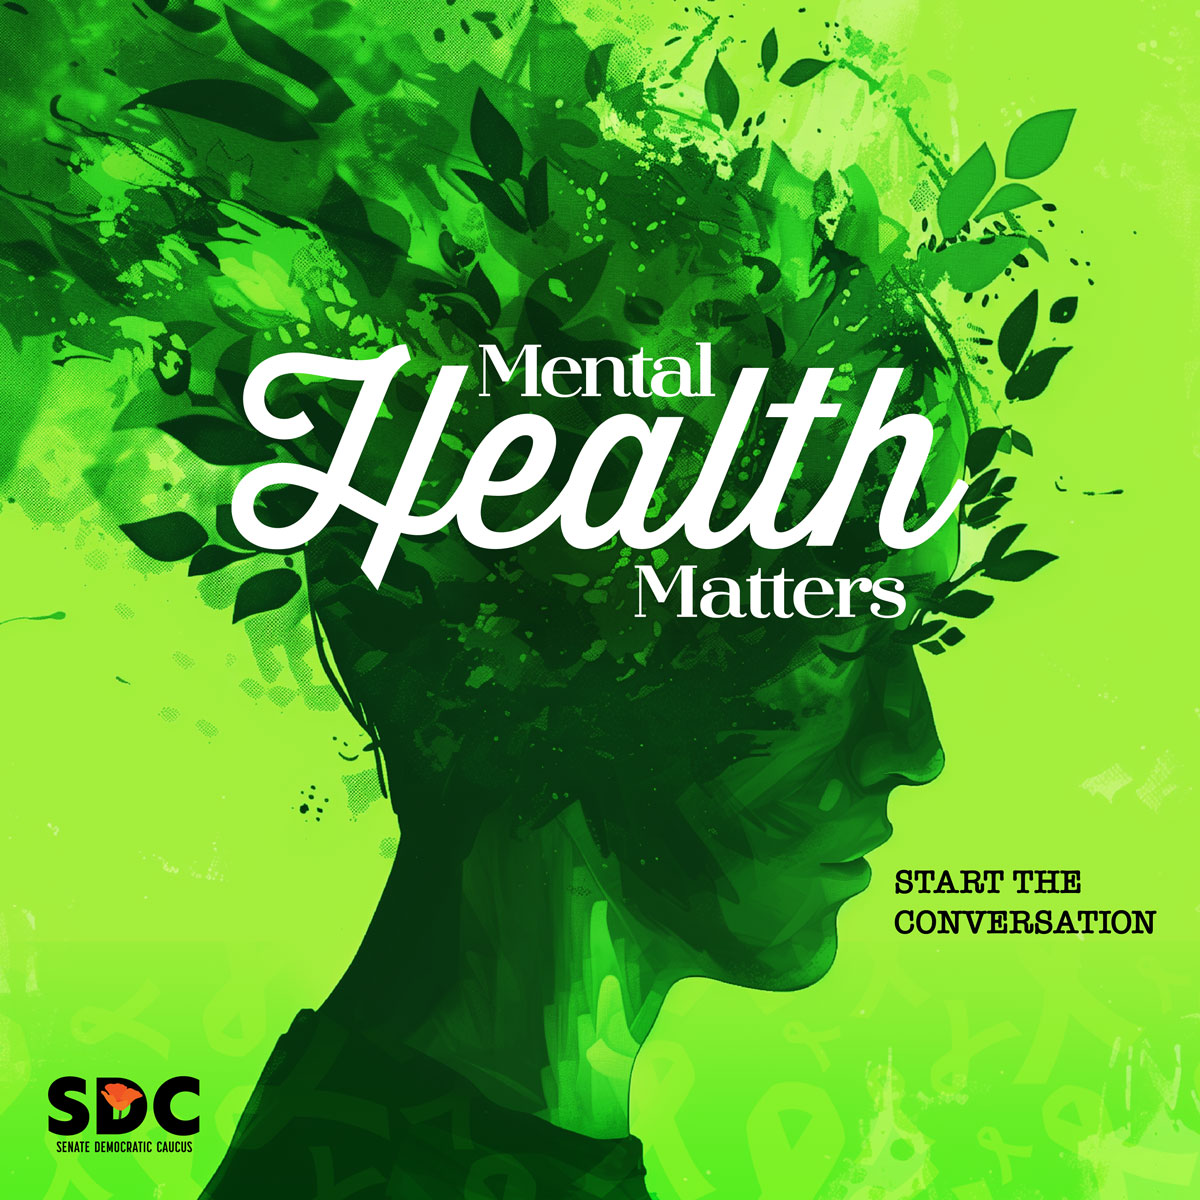 It's #MentalHealthAwarenessMonth. Each yr, 1/5 US adults experience mental illness & 1/6 US youth aged 6-17 have a mental health condition (Source @NAMI). Let's continue to fight stigma, provide support, educate & advocate for policies that support people w/ mental illness #CALeg